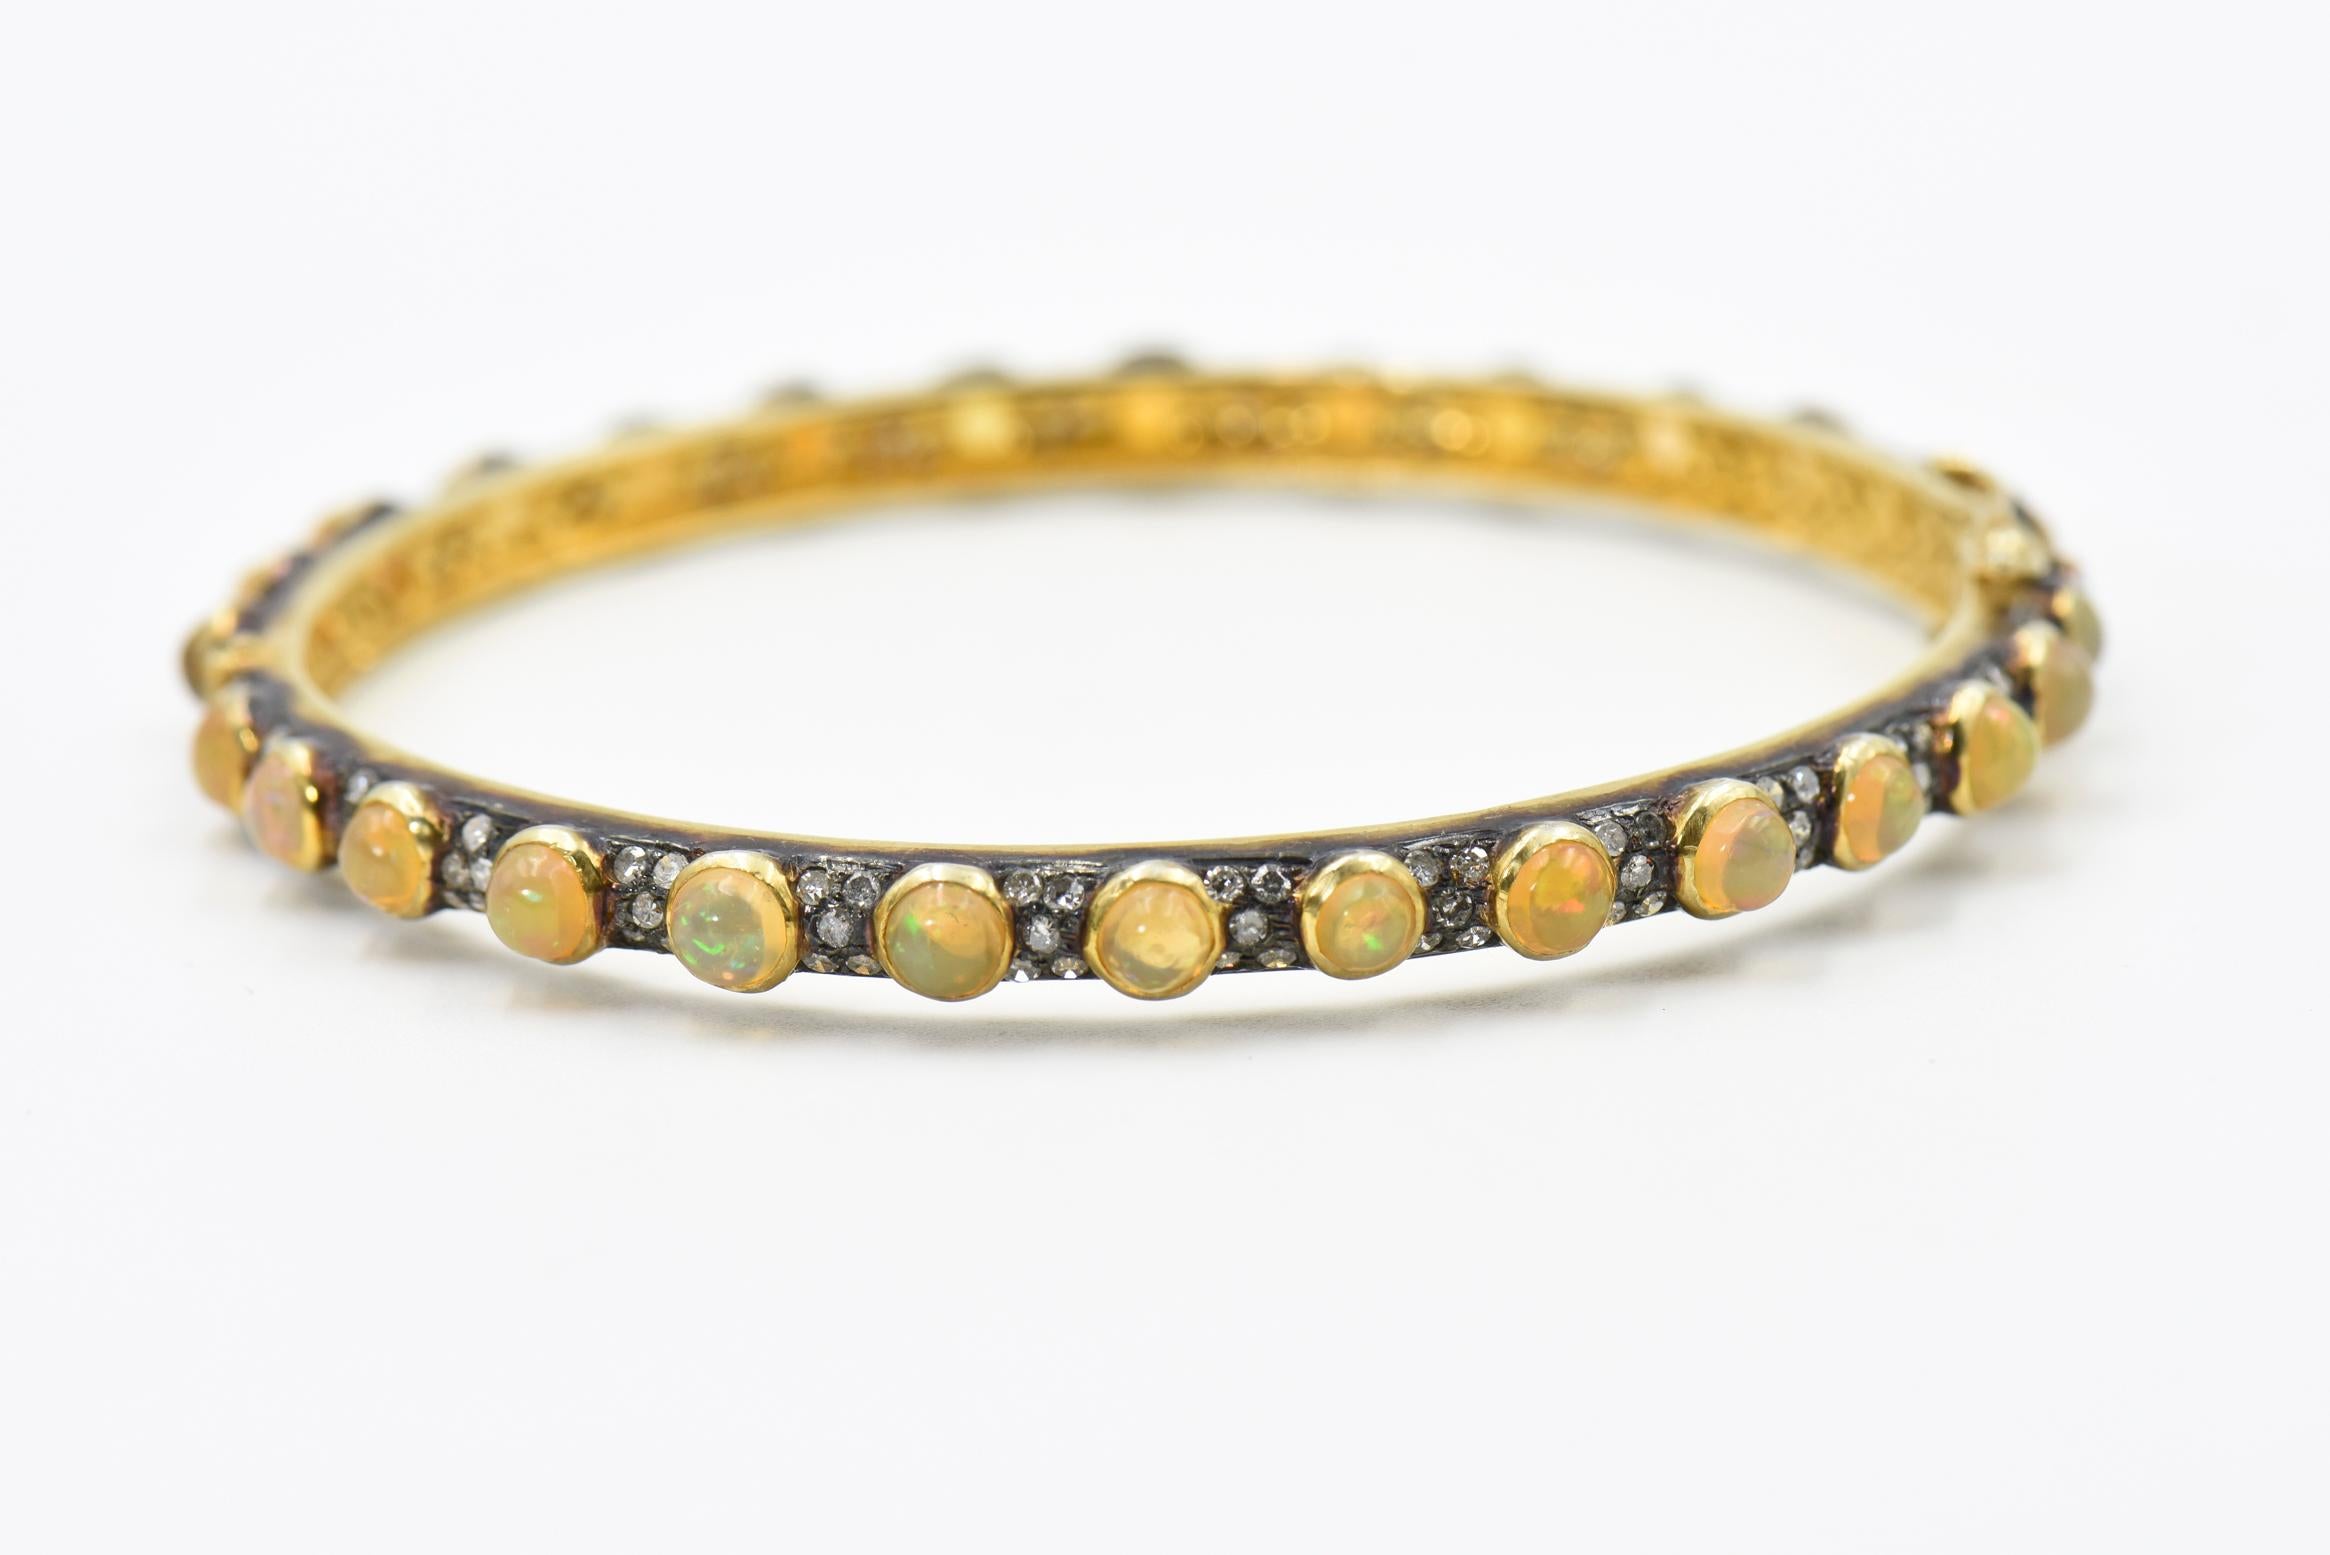 Pair of Opal Diamond Vermeil Sterling Silver Bangle Bracelets In Good Condition For Sale In Miami Beach, FL